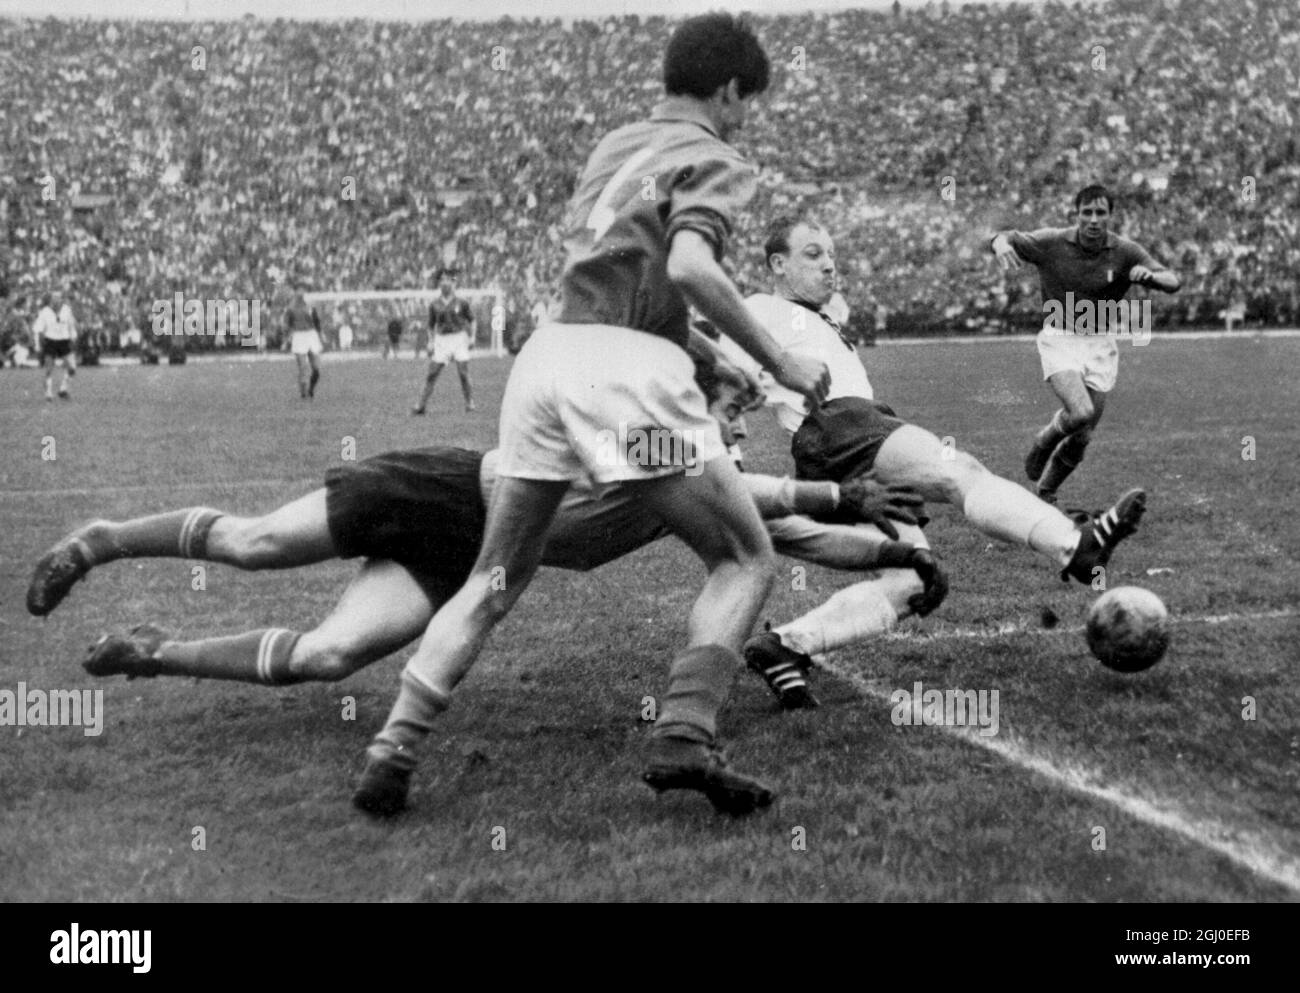 1962 World Cup Italy v West Germany Italian goalkeeper Buffon dives for a shot from Germany's Seeler with Italy's Salvatori (foreground) moving in during the World Cup match between Germany and Italy at National stadium, Santiago Chile. 1st June 1962. Stock Photo